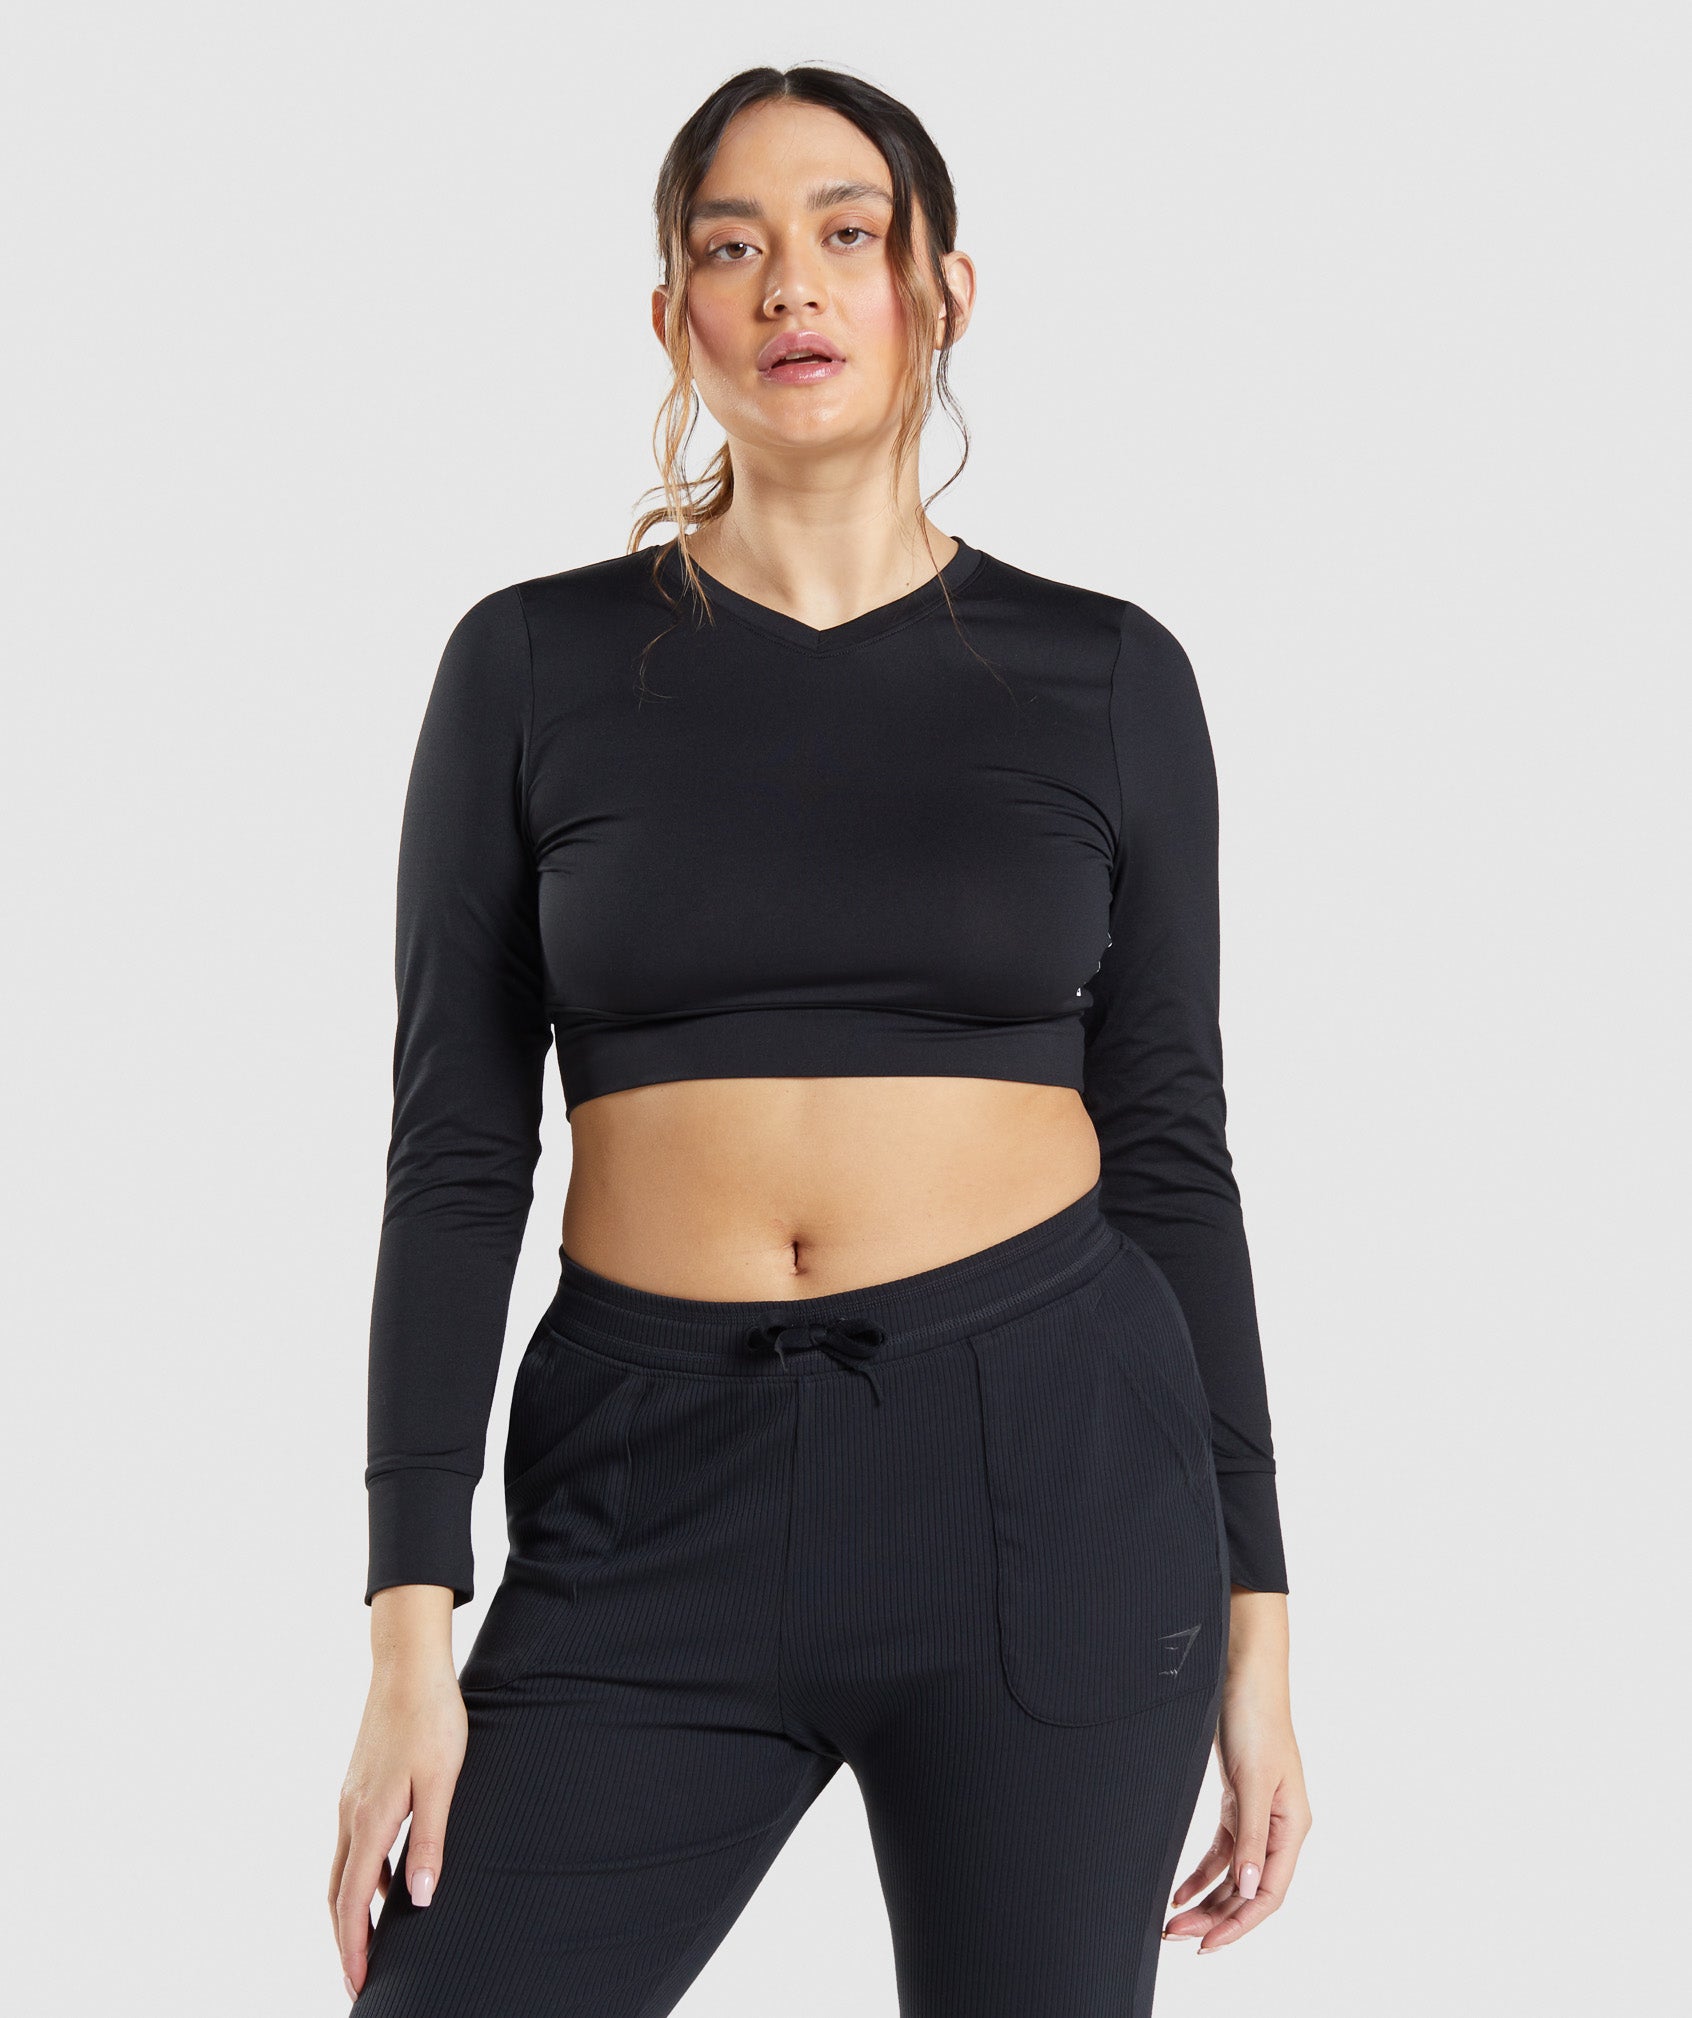 Pause Open Back Long Sleeve Crop Top in Black - view 1